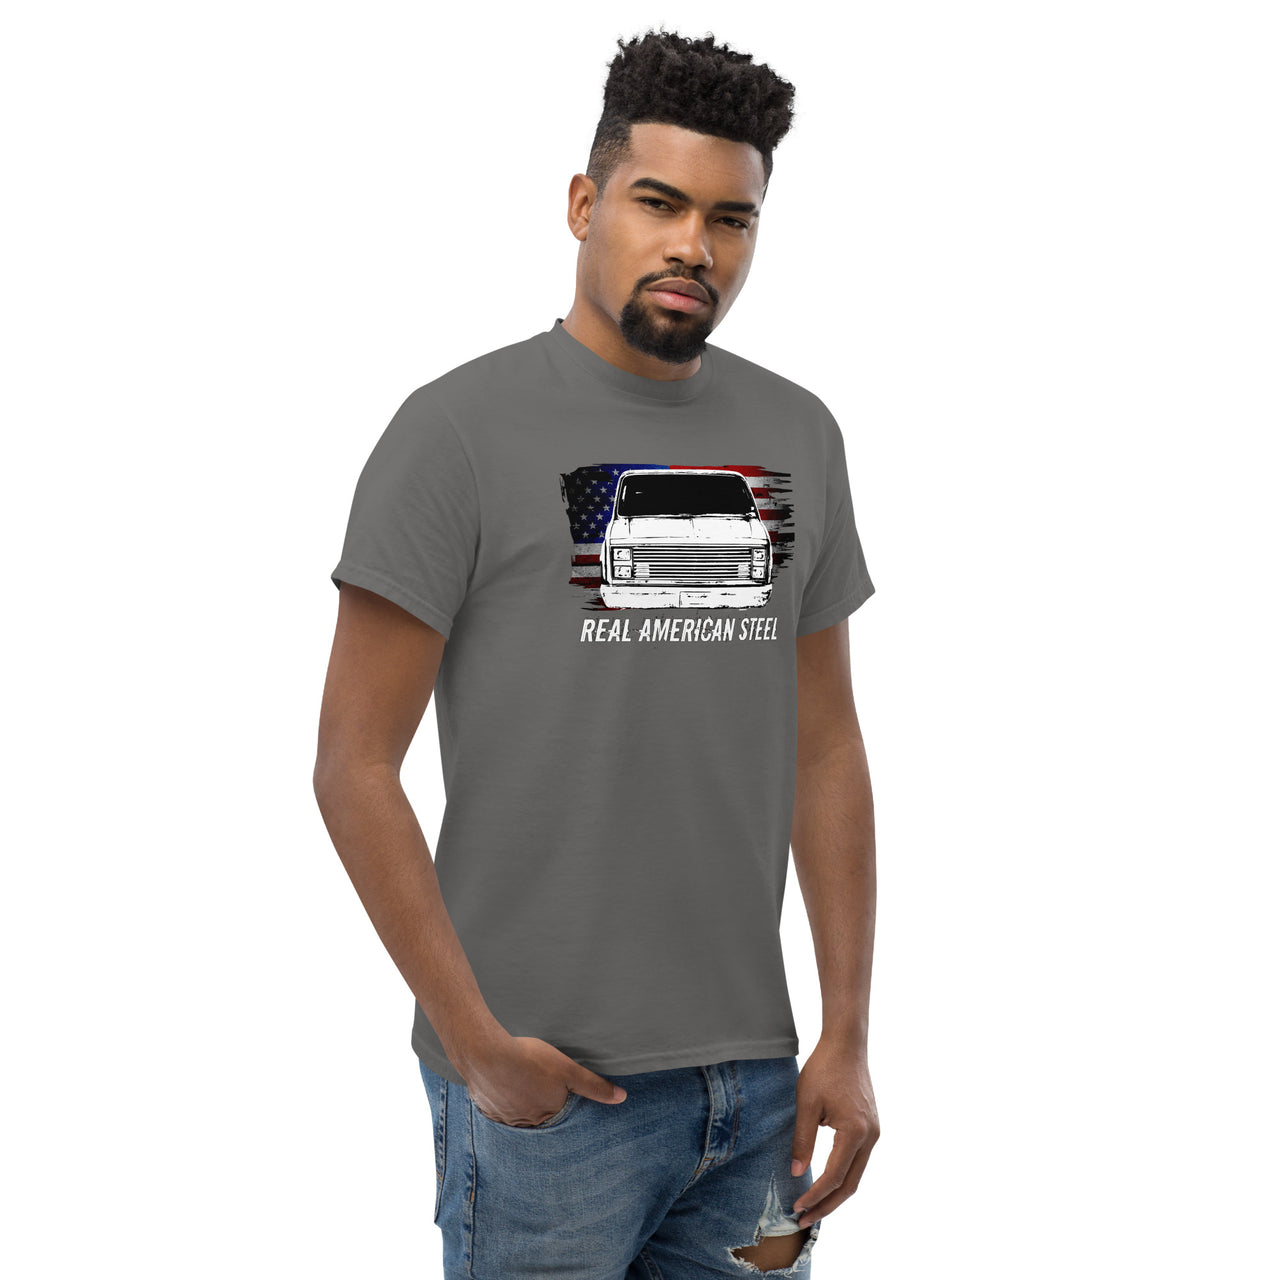 C10 Square Body T-Shirt modeled in grey